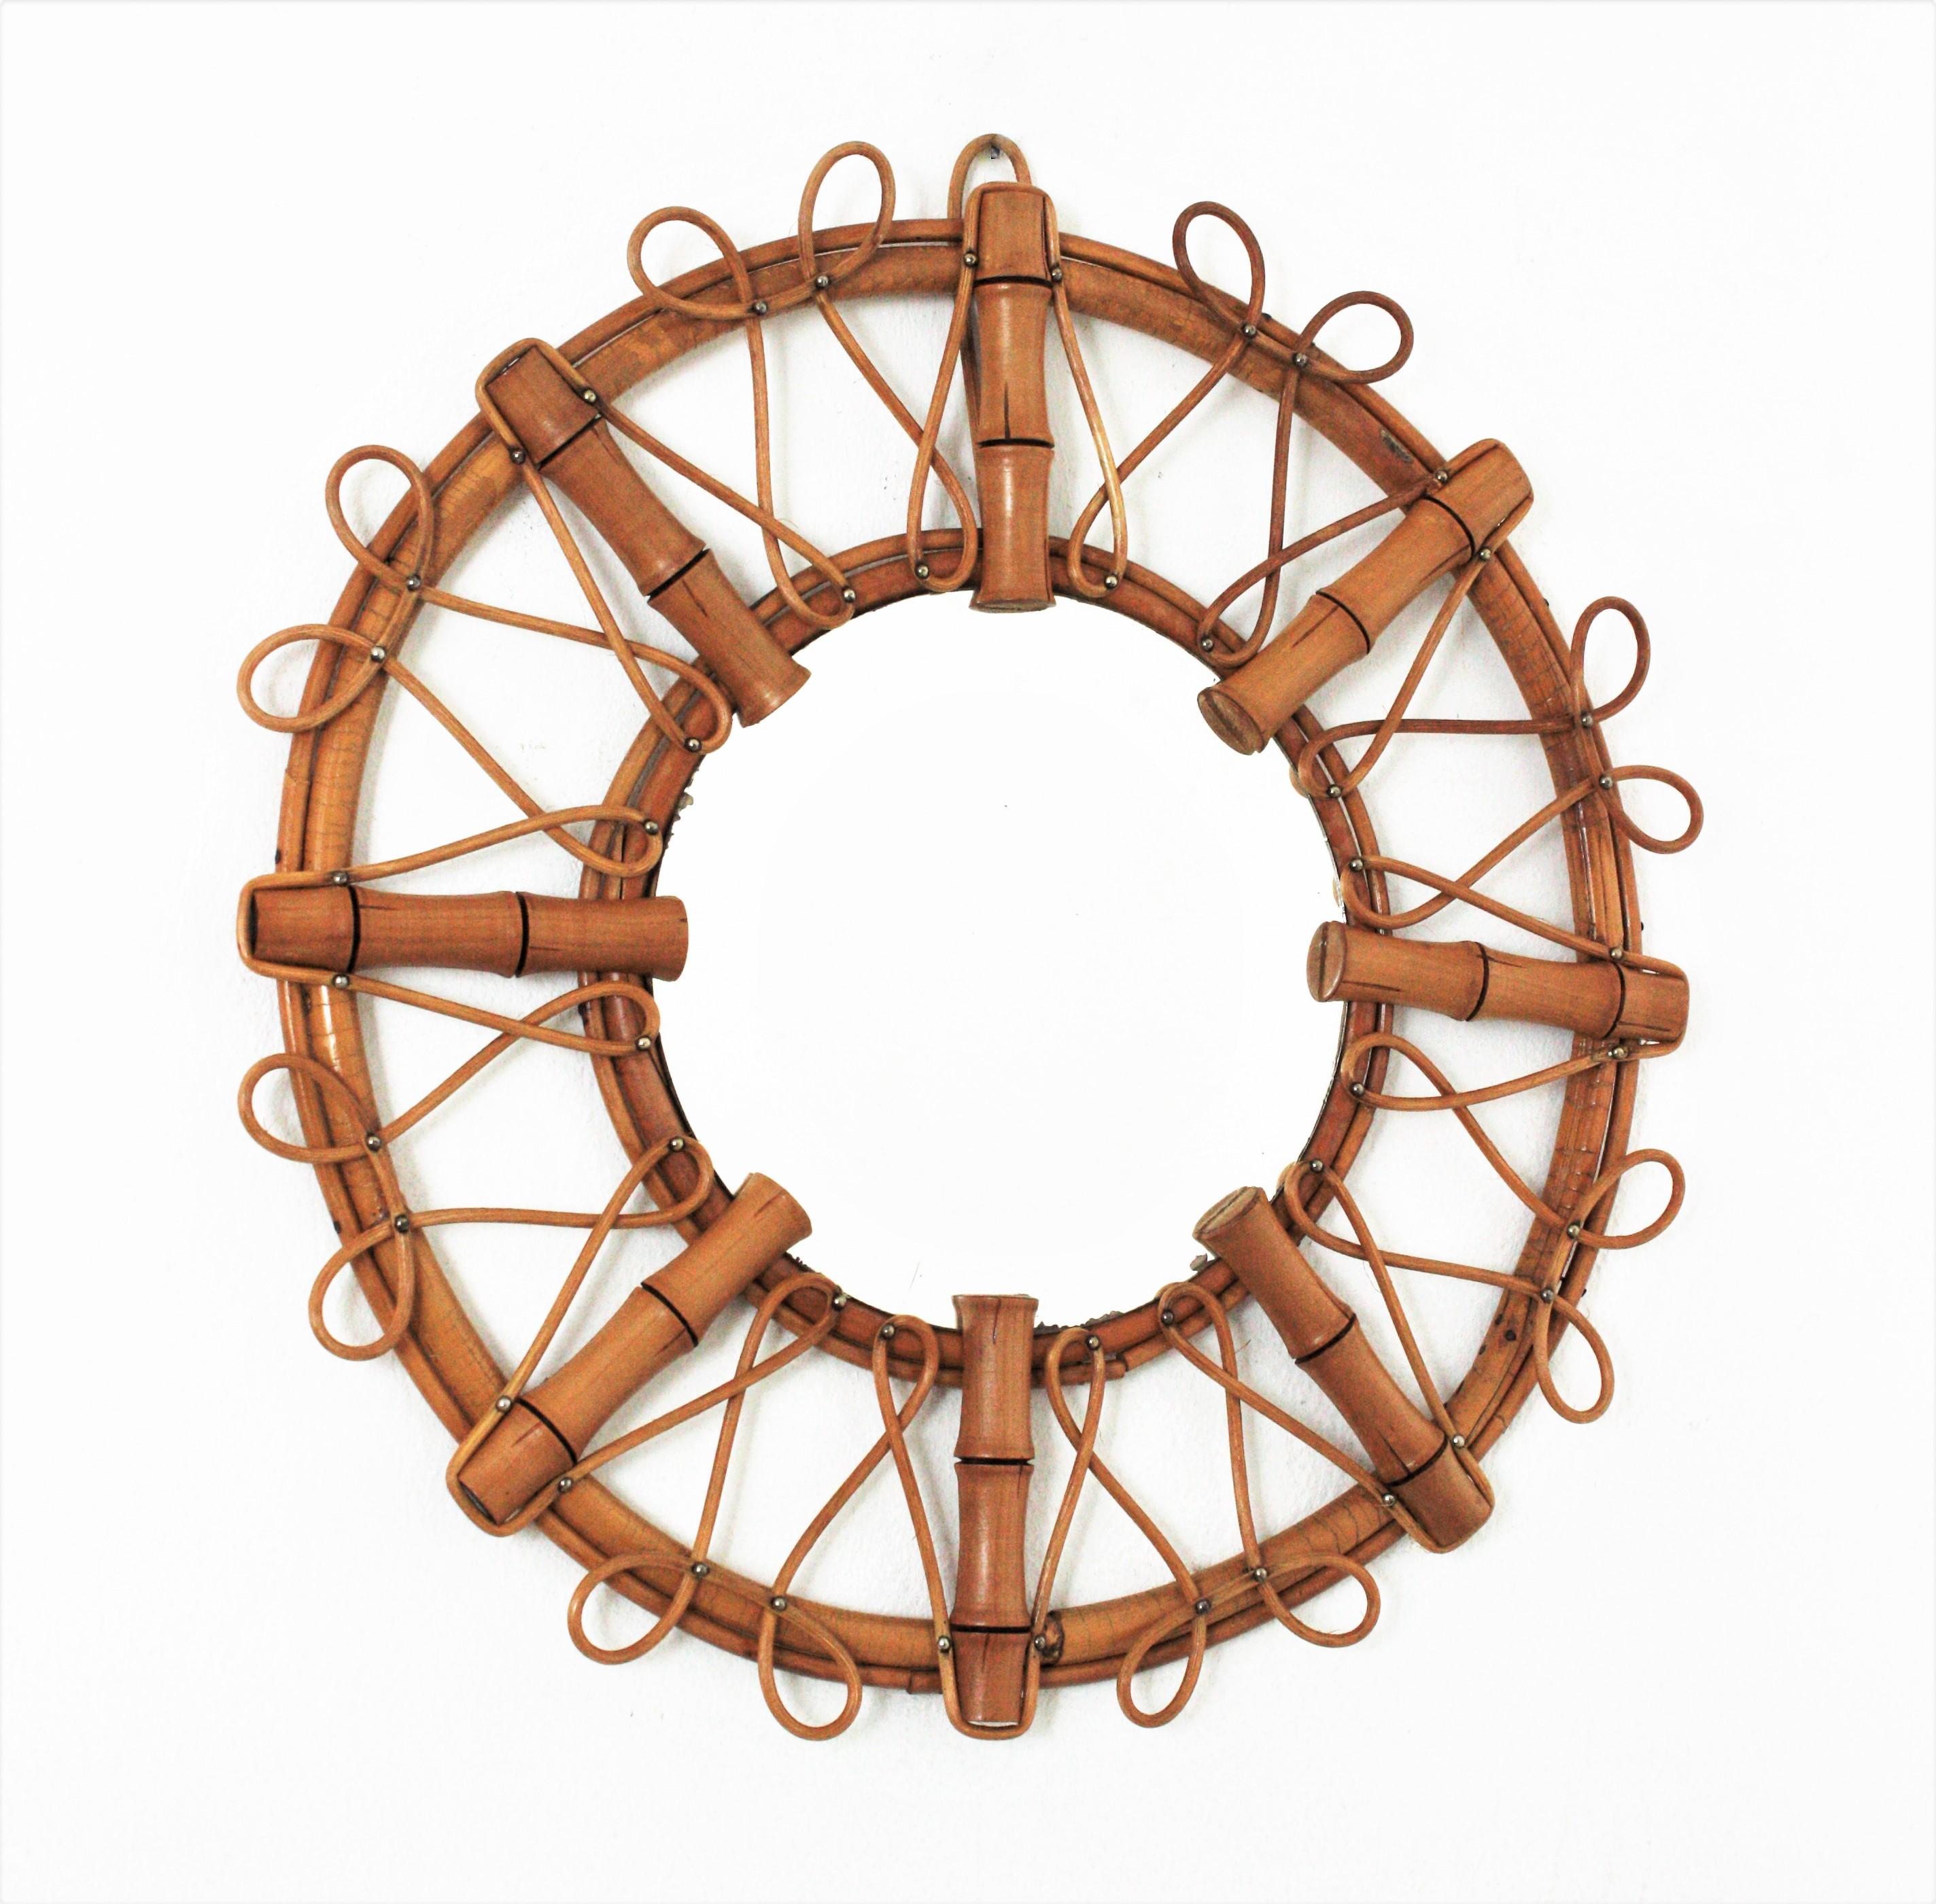 Eye-catching bamboo and rattan sunburst mirror with looped details. Handcrafted in France, 1960s.
This cool rattan wall mirror combines midcentury and chinoiserie accents. It has all the taste and freshness of the Mediterranean Coast.
This bamboo